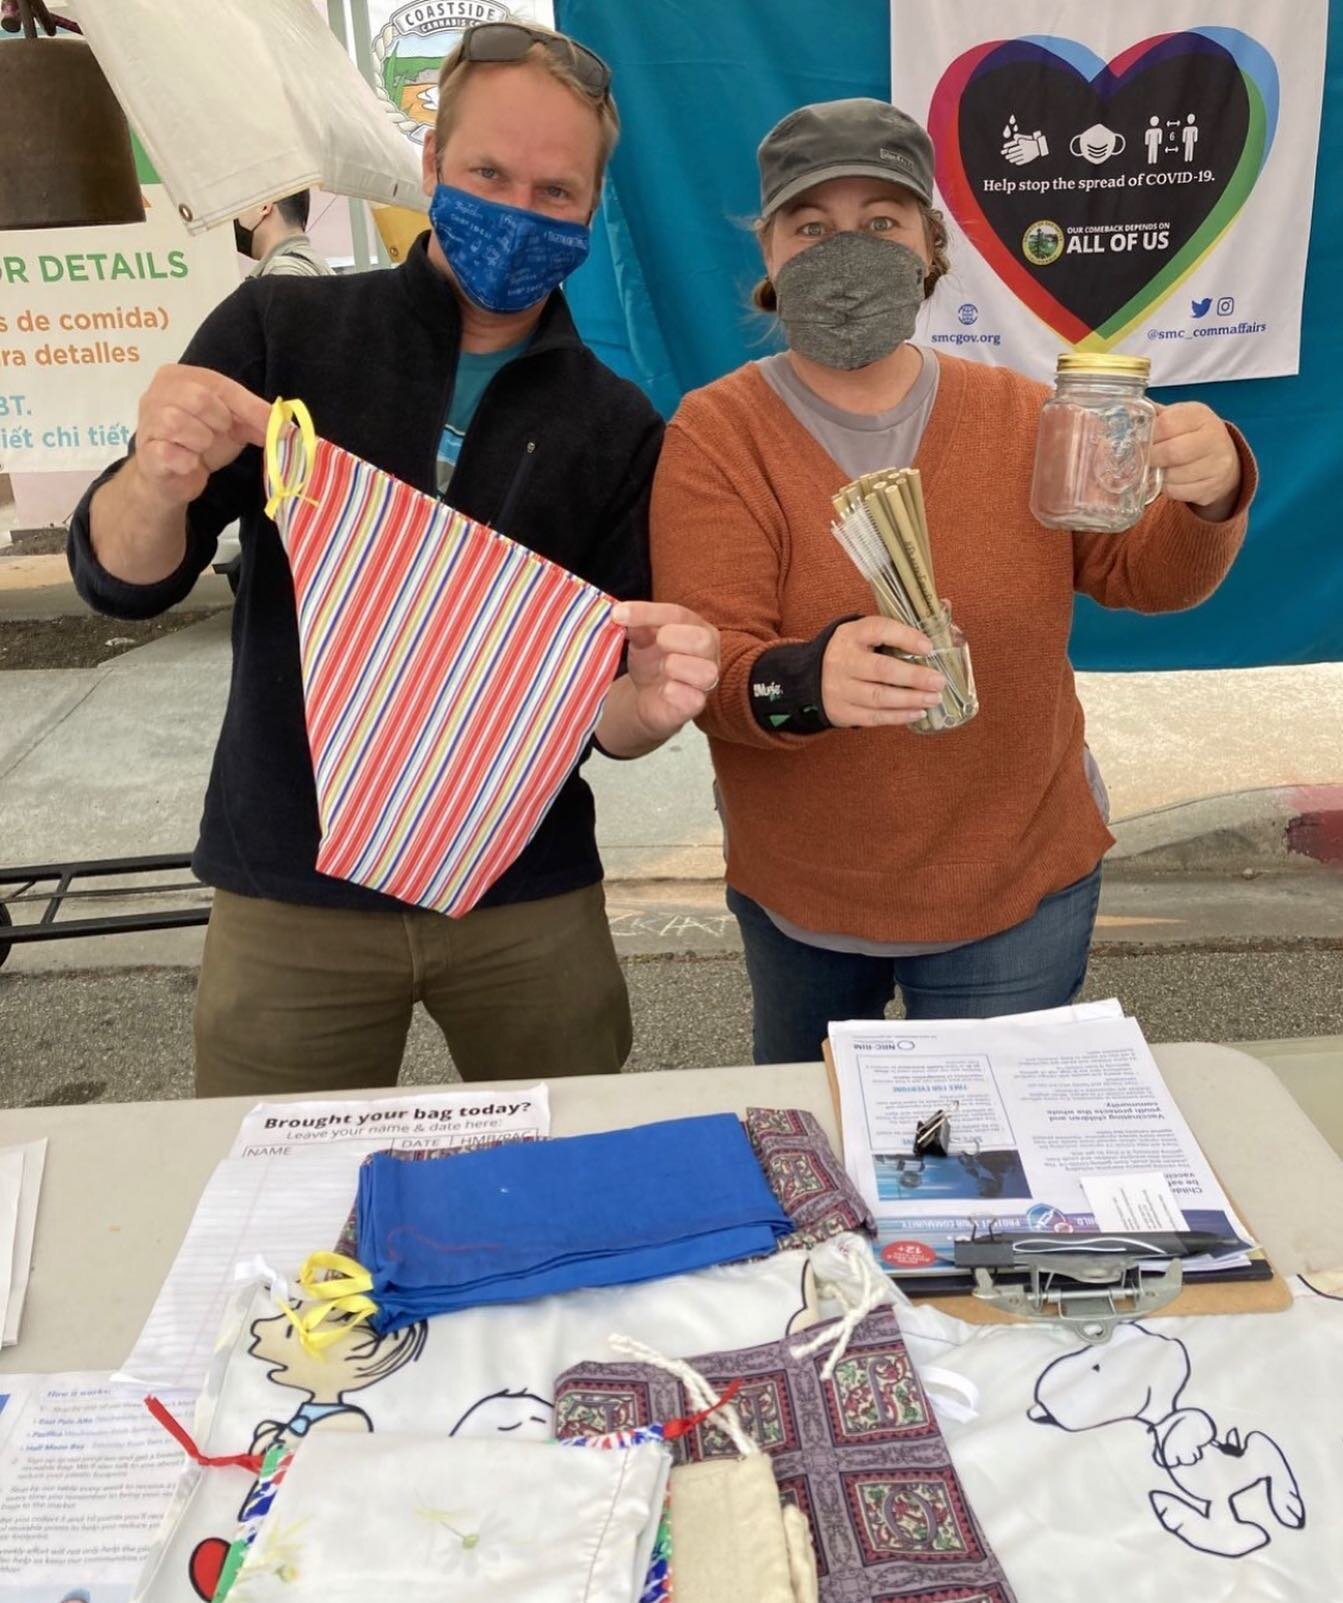 Ready to reduce your plastic footprint? Join our reusable incentive program in Pacifica today from 3-5 pm! Our prizes include reusable produce bags, reusable straws, reusable jars for cold drinks, reusable snack bags and more! Learn more about #reuse